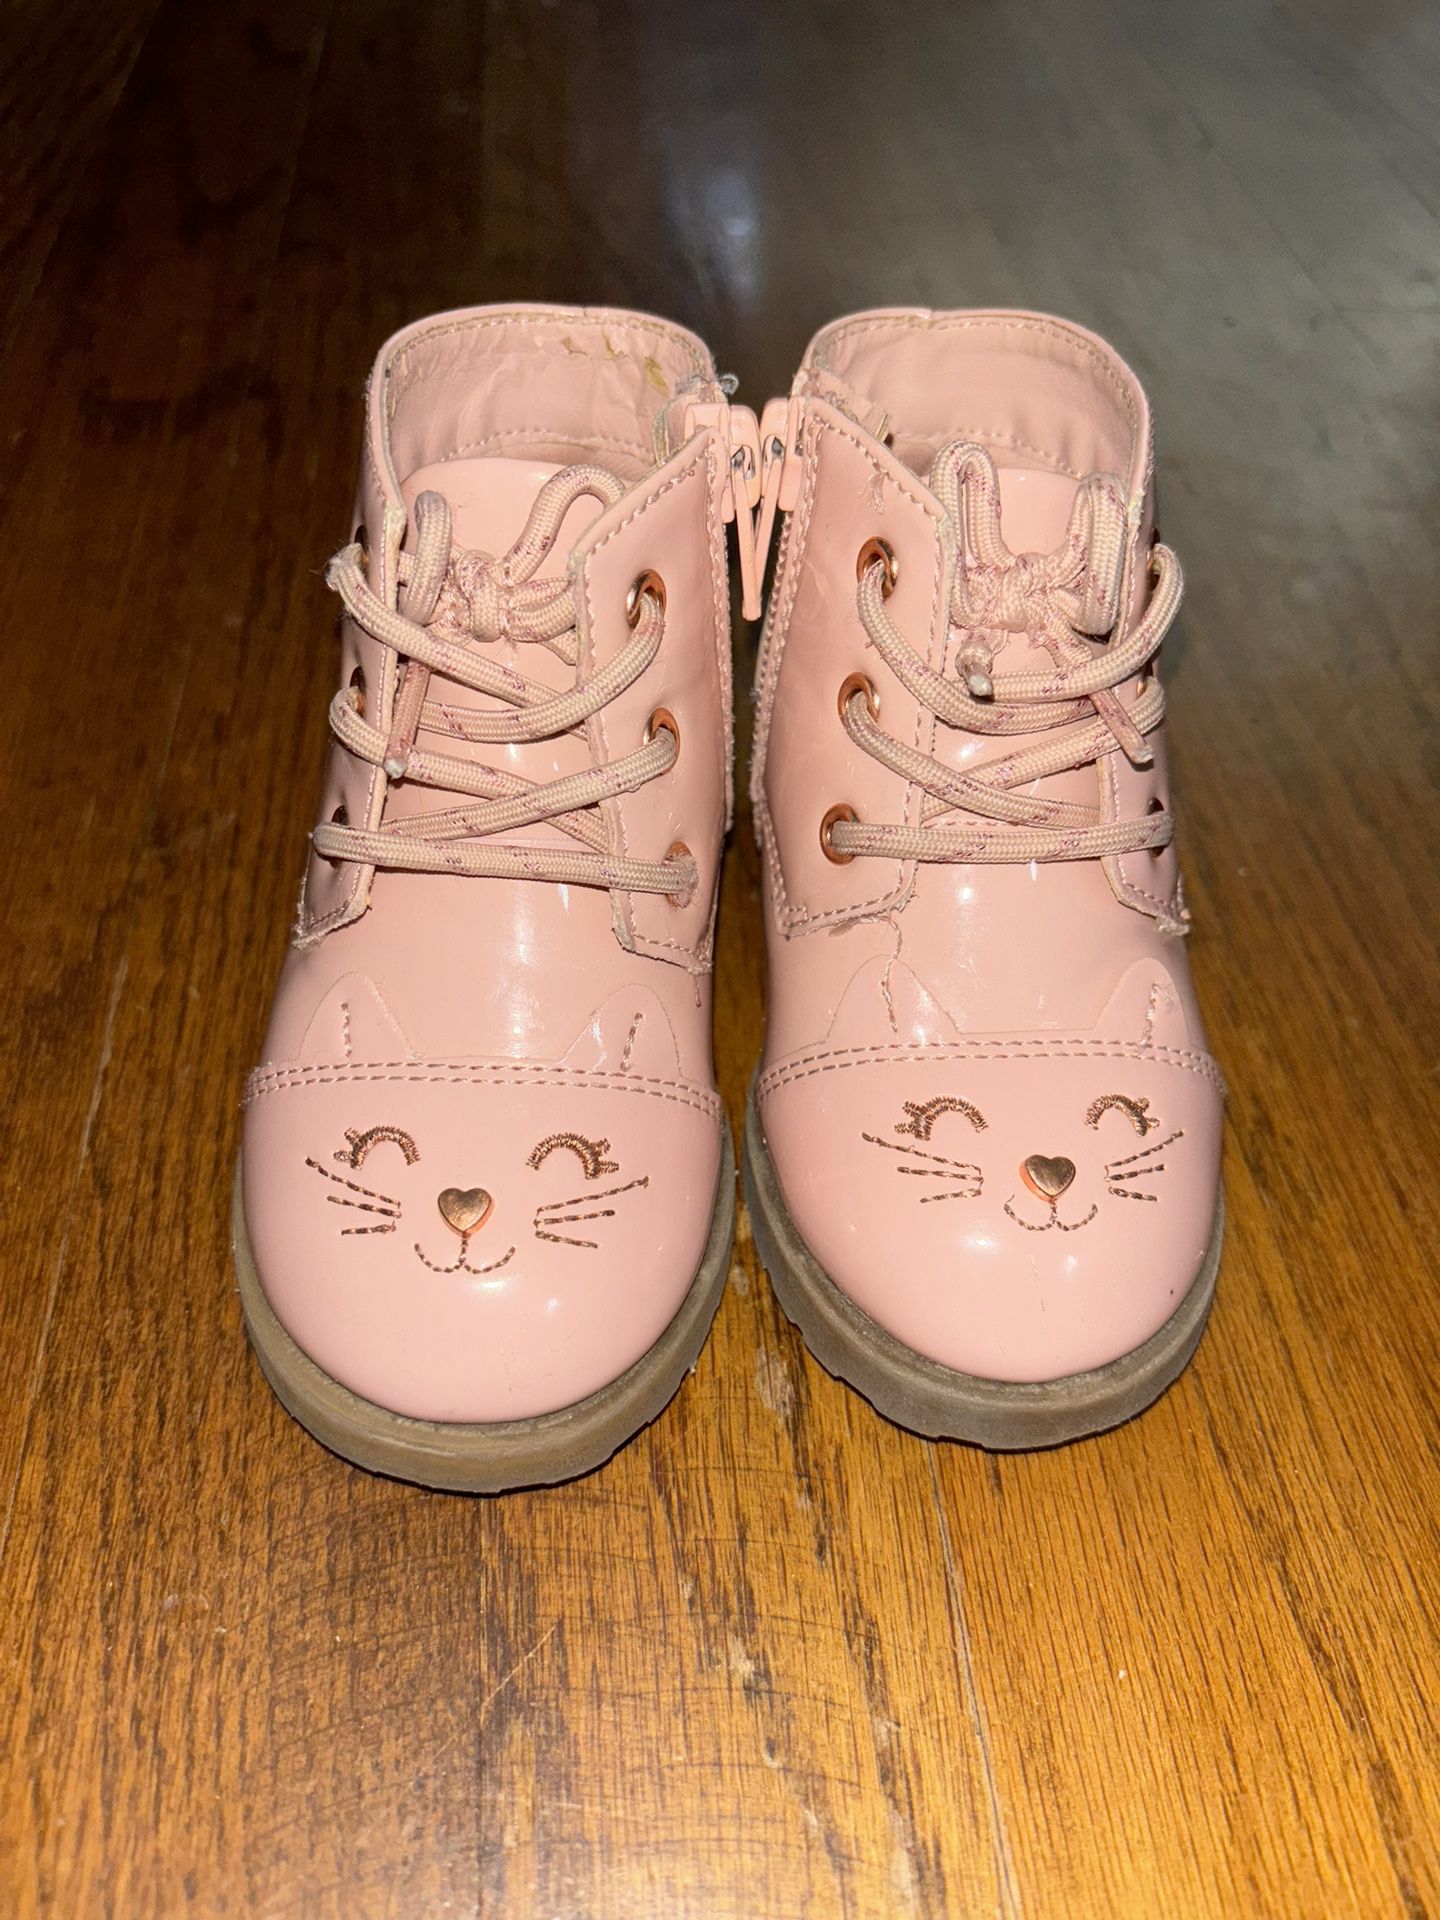 Babygirl Boots Size 5c